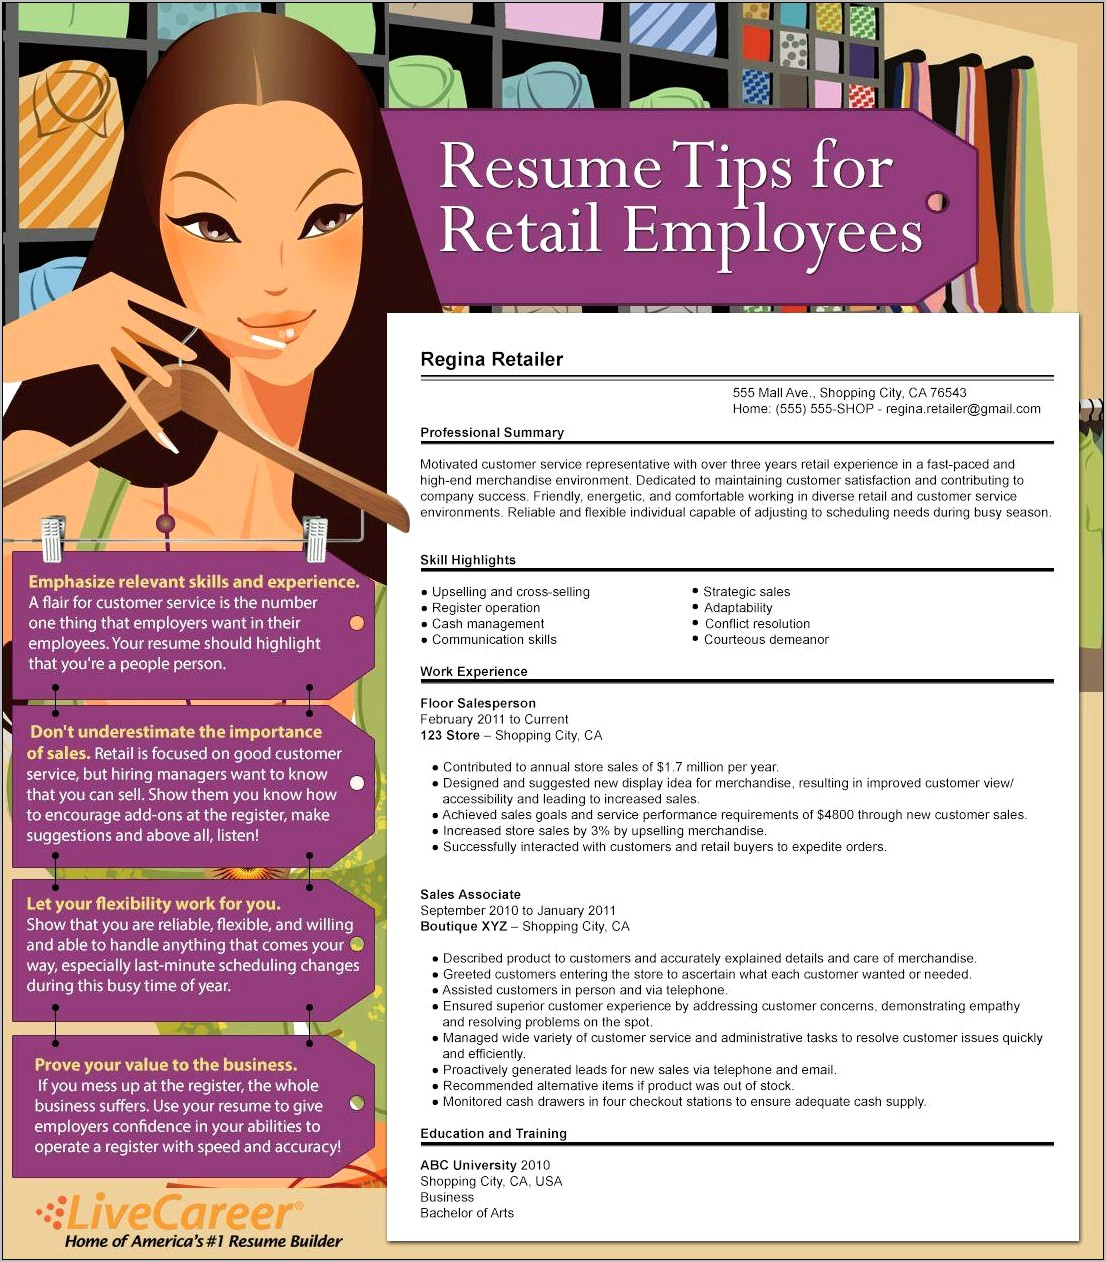 Should You Put Retail Work On Your Resume